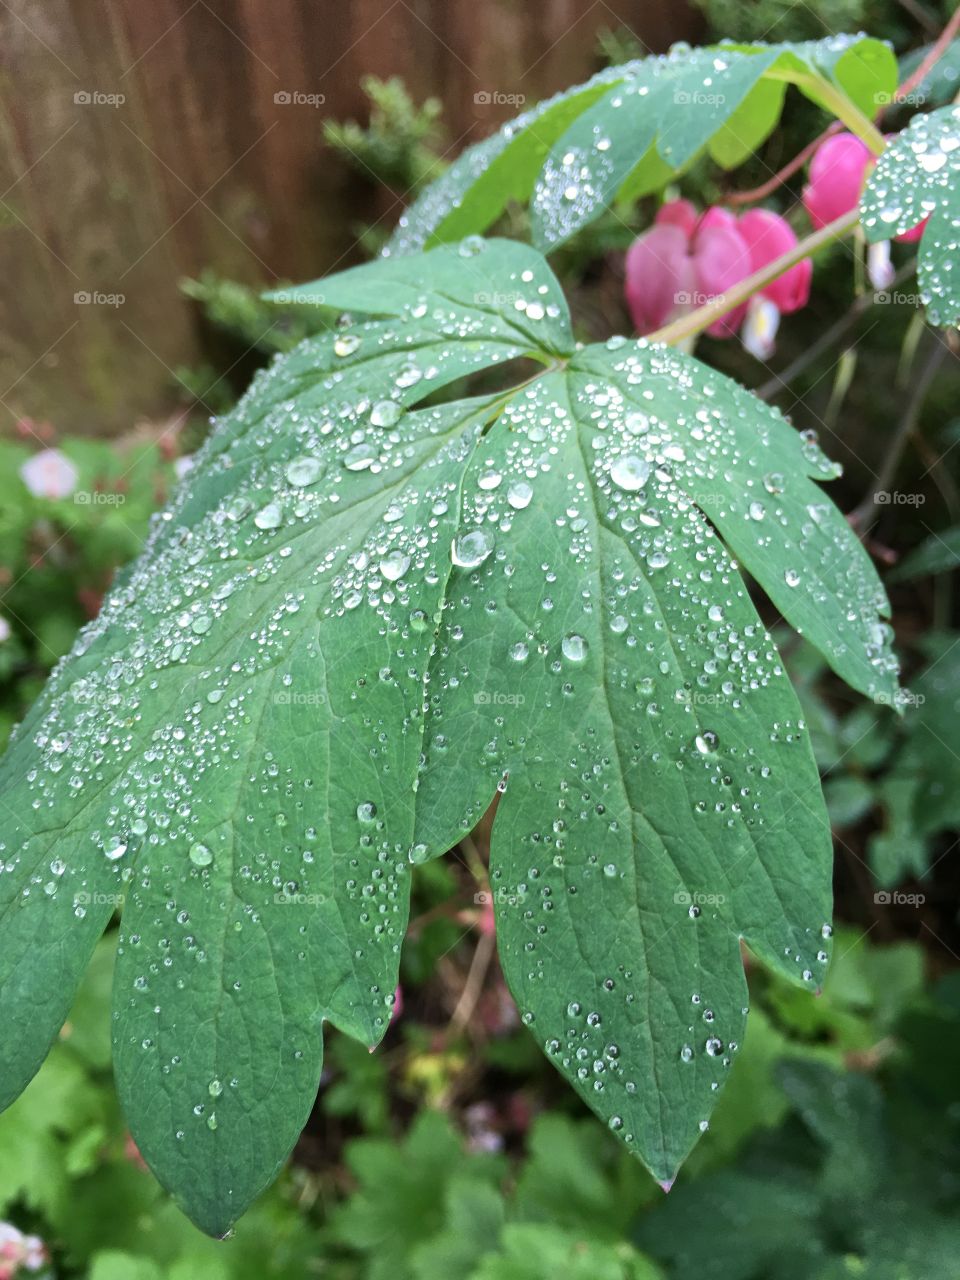 Close up view of raindrops on Dicentra leaves of the plant in the garden with Dicentra flowers in the background 